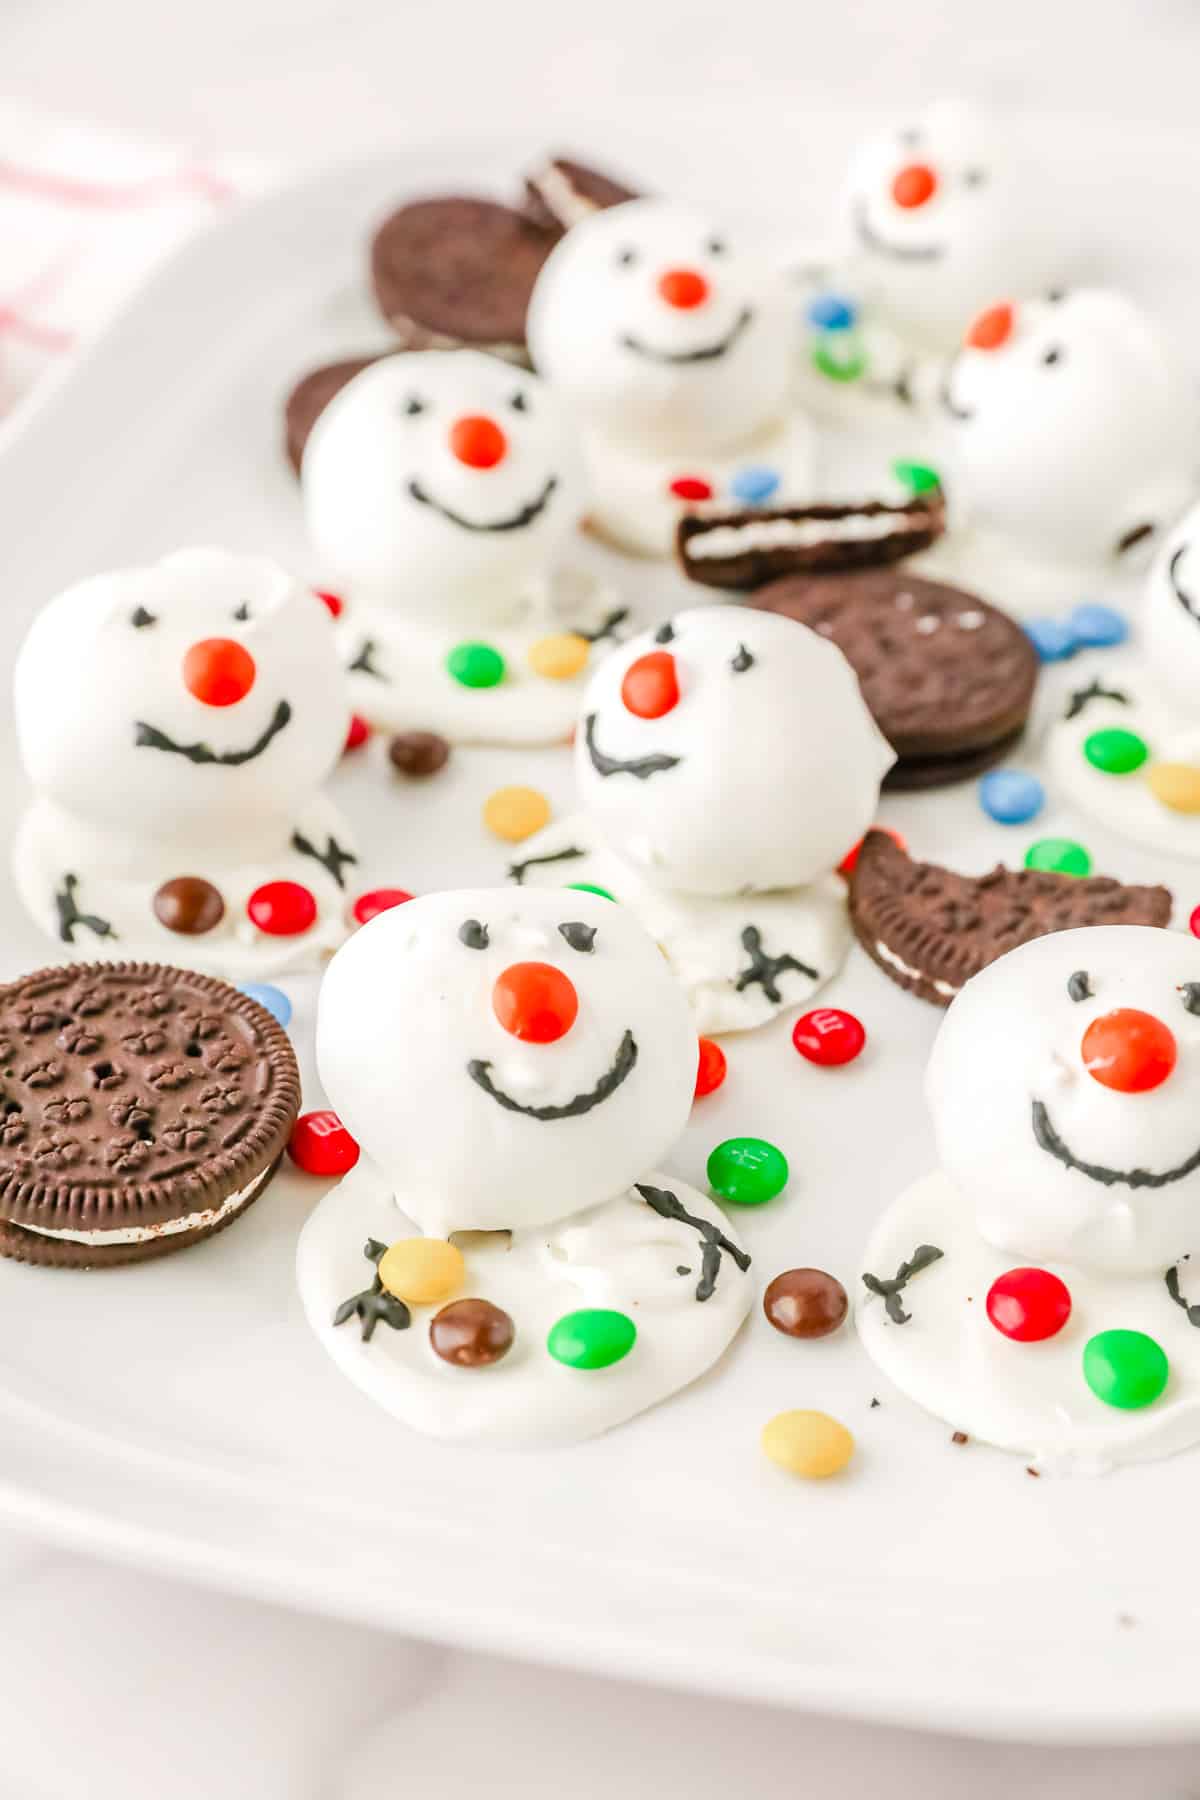 Snowman oreo balls on a platter with more oreo cookies and mini M&Ms.